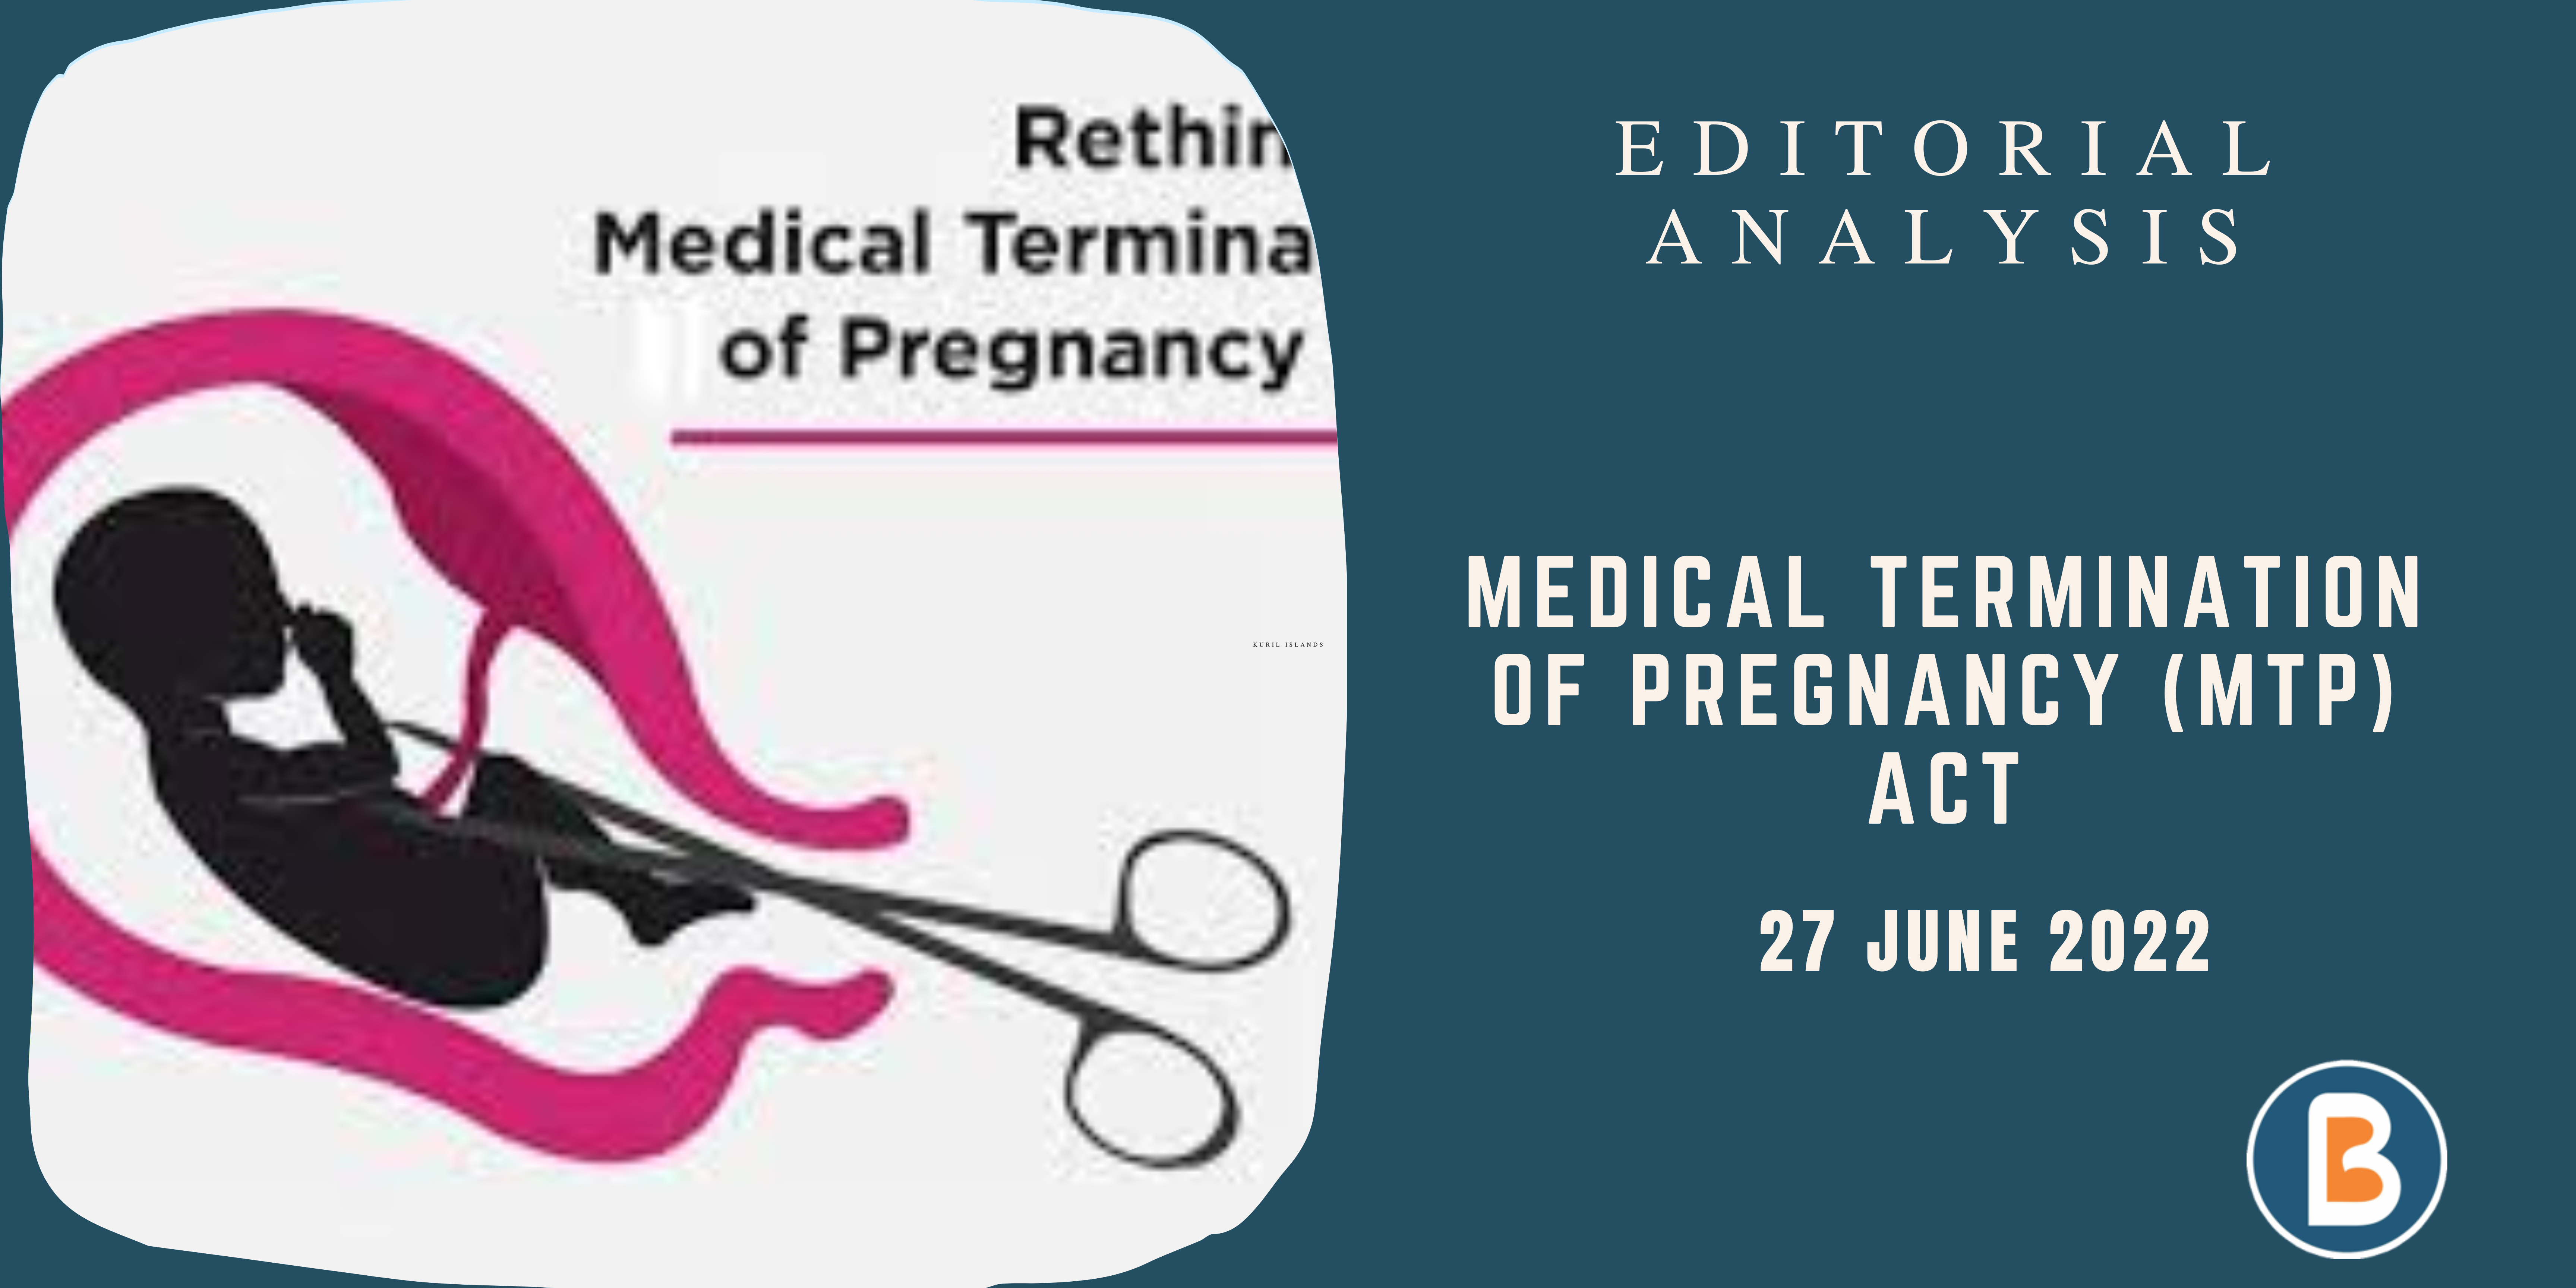 Editorial Analysis for IAS - Medical Termination of Pregnancy (MTP) Act